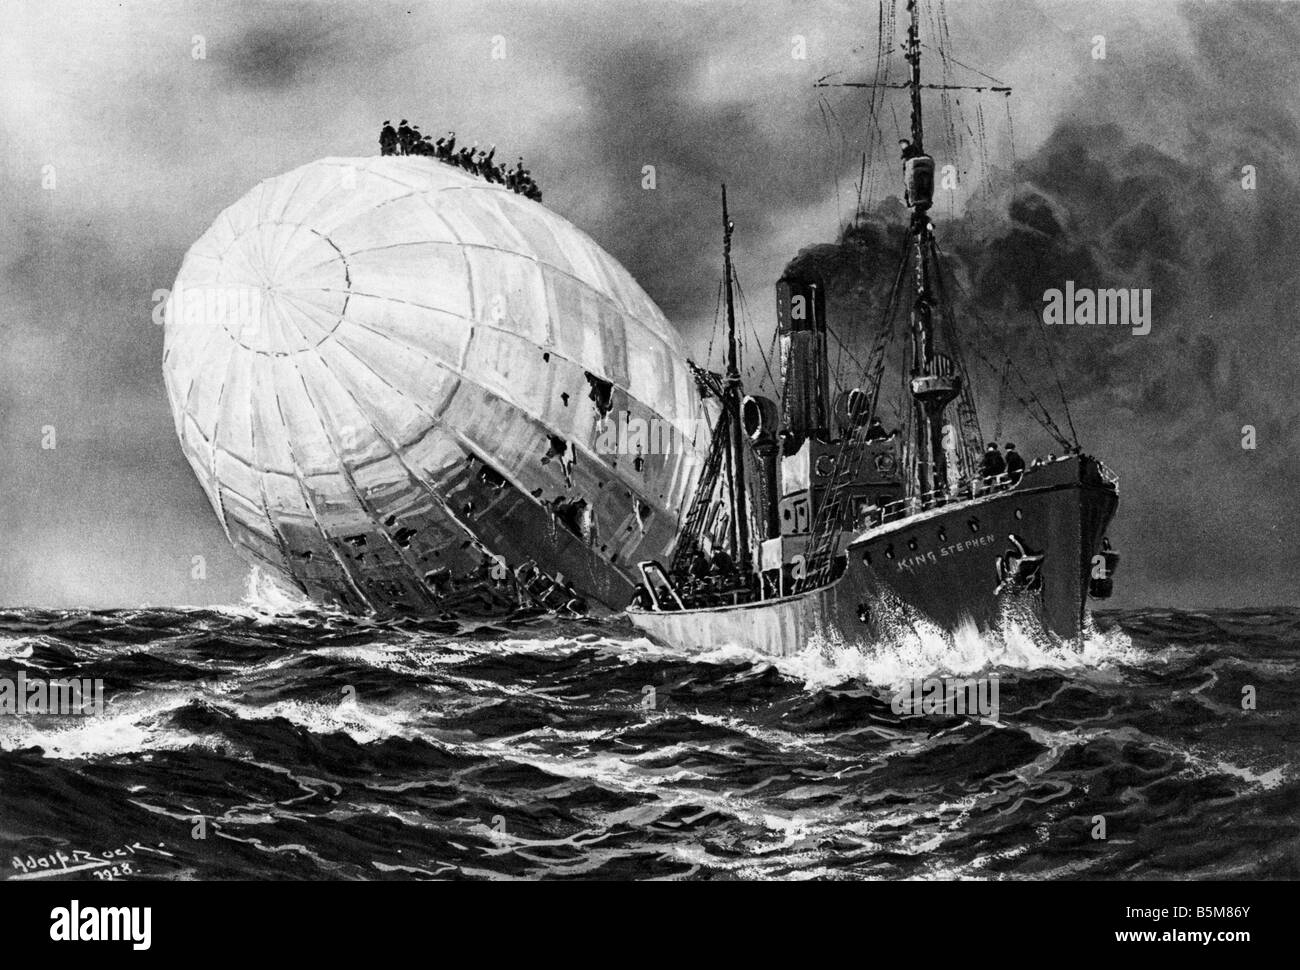 2 G55 B1 1917 WWI Crashed Airship L19 1917 History WWI Aerial Warfare The English Fish Steamer King Stephan refuses to rescue th Stock Photo